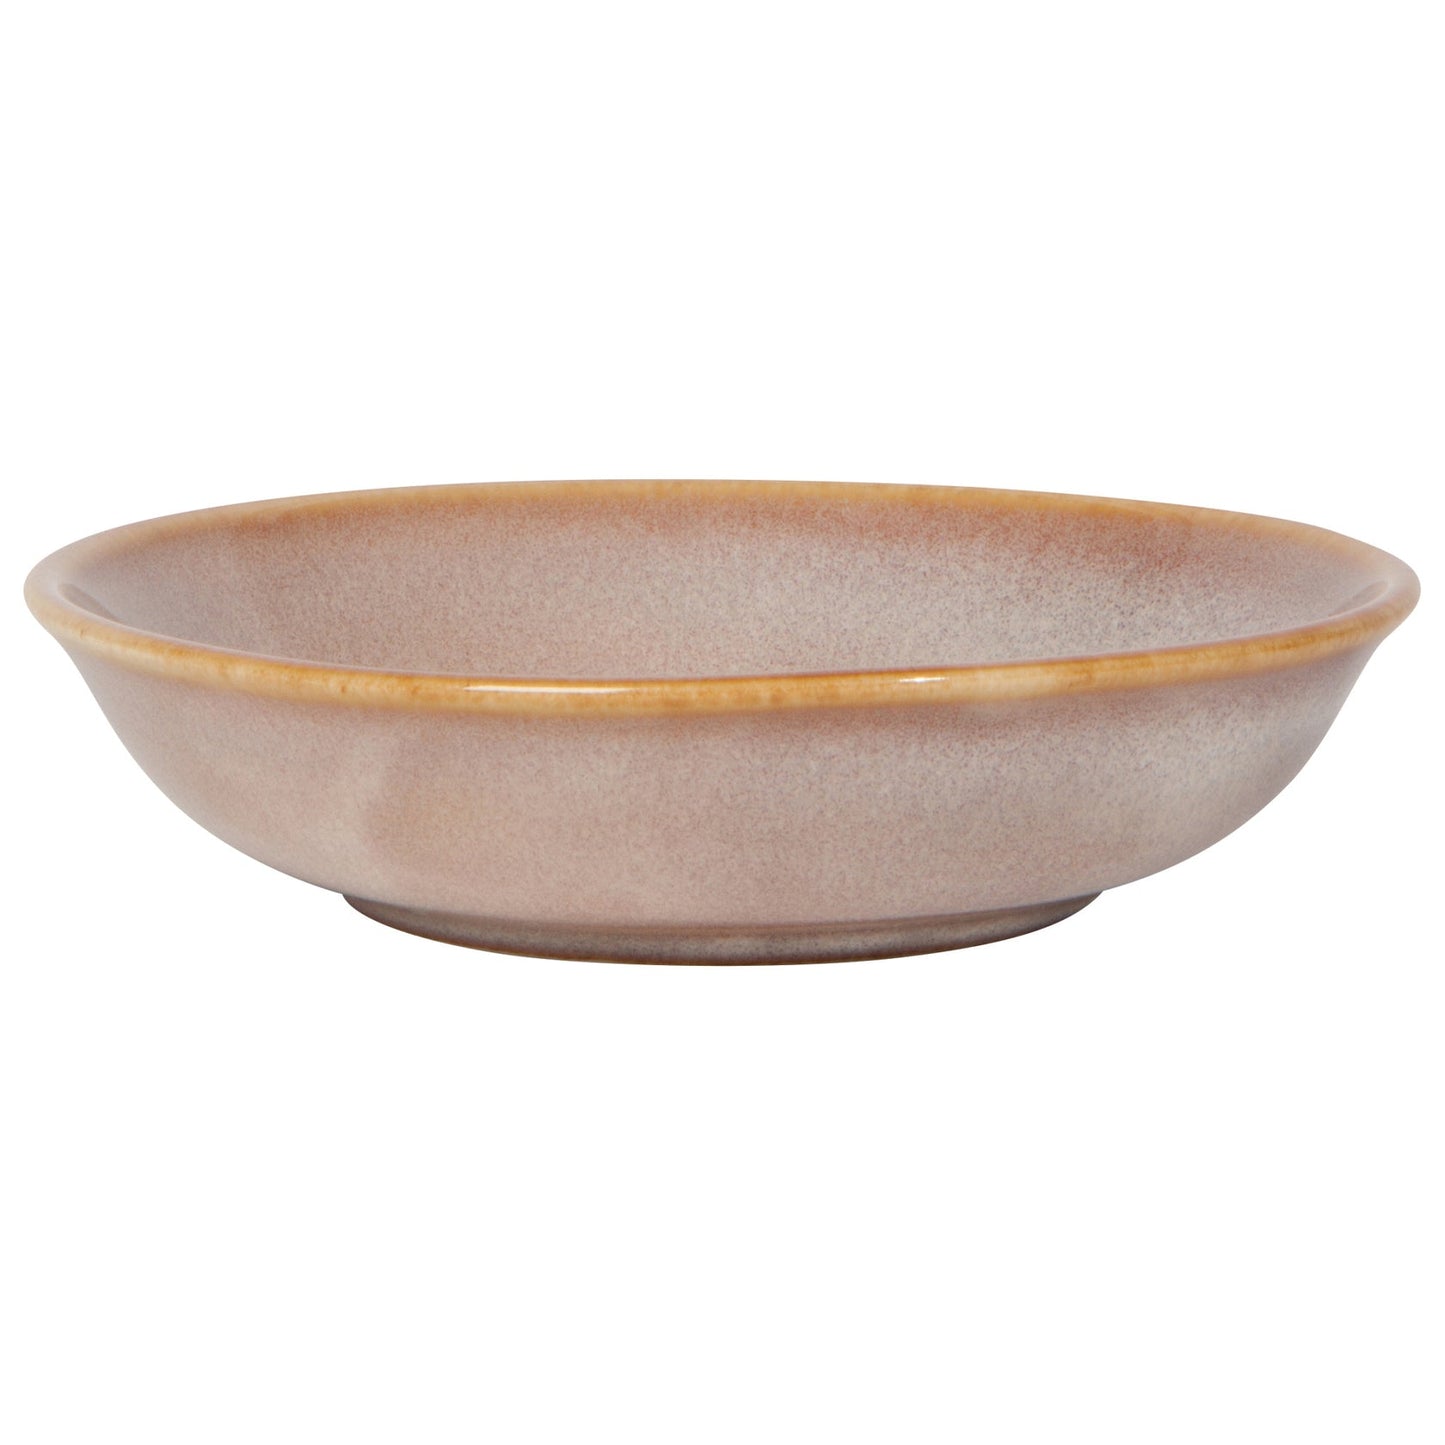 Nomad Stone Dipping Dish Set of 4